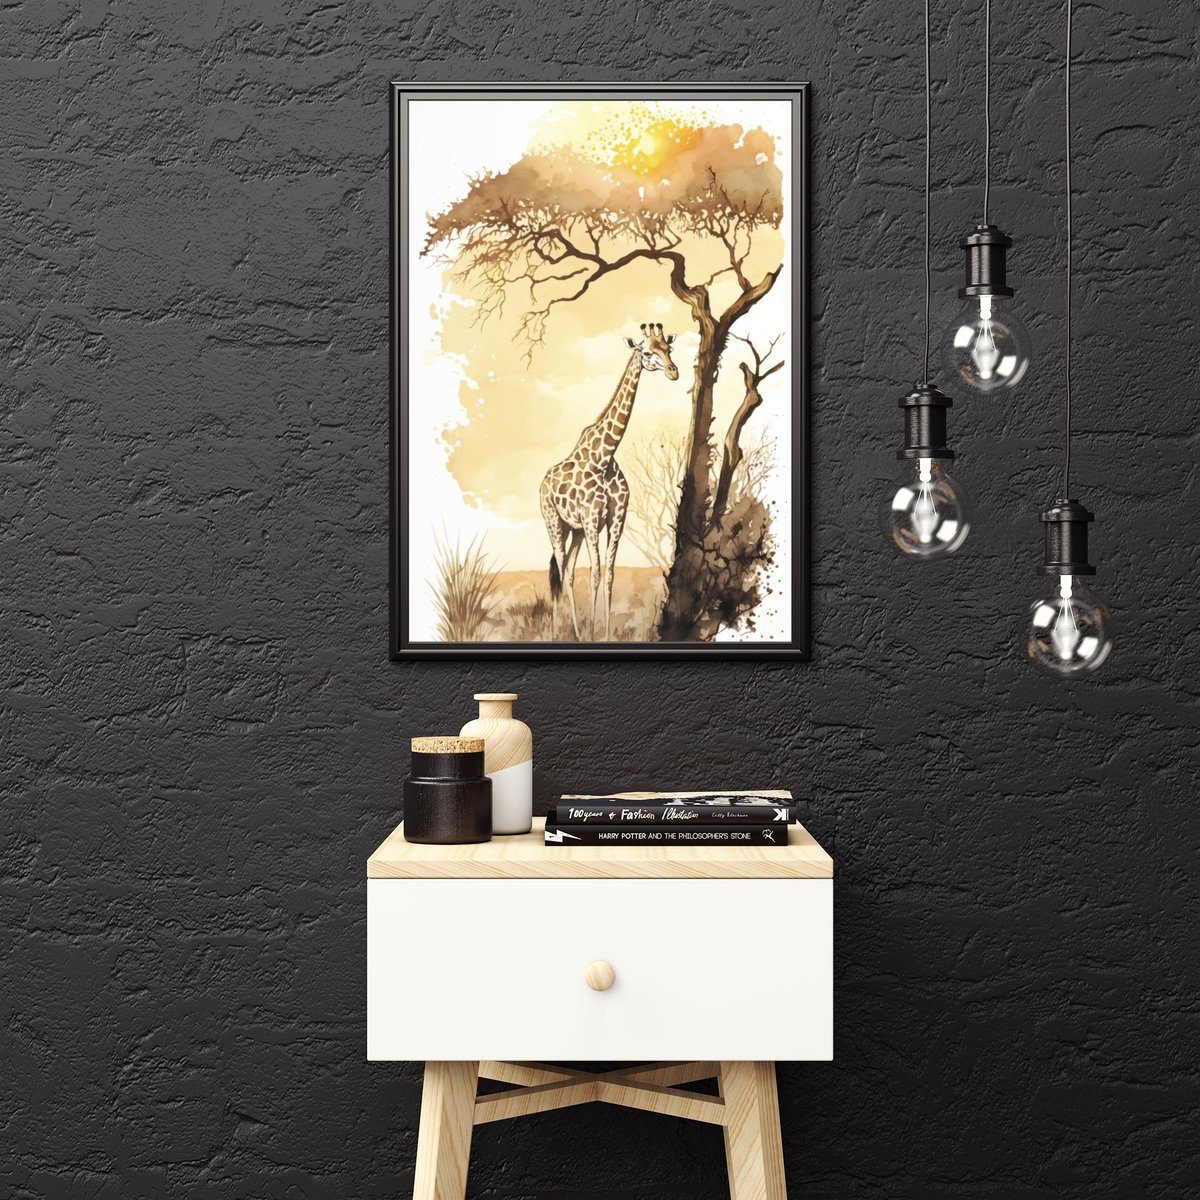 Excited to share the latest addition to my #etsy shop

A Majestic Giraffe Standing Gracefully Beneath a Towering Tree in the African Savannah

etsy.me/44LKvBa 

#giraffeart #hugegiraffee #africangiraffe #cutegiraffee #nurseryroomart #naturescape #animalscape